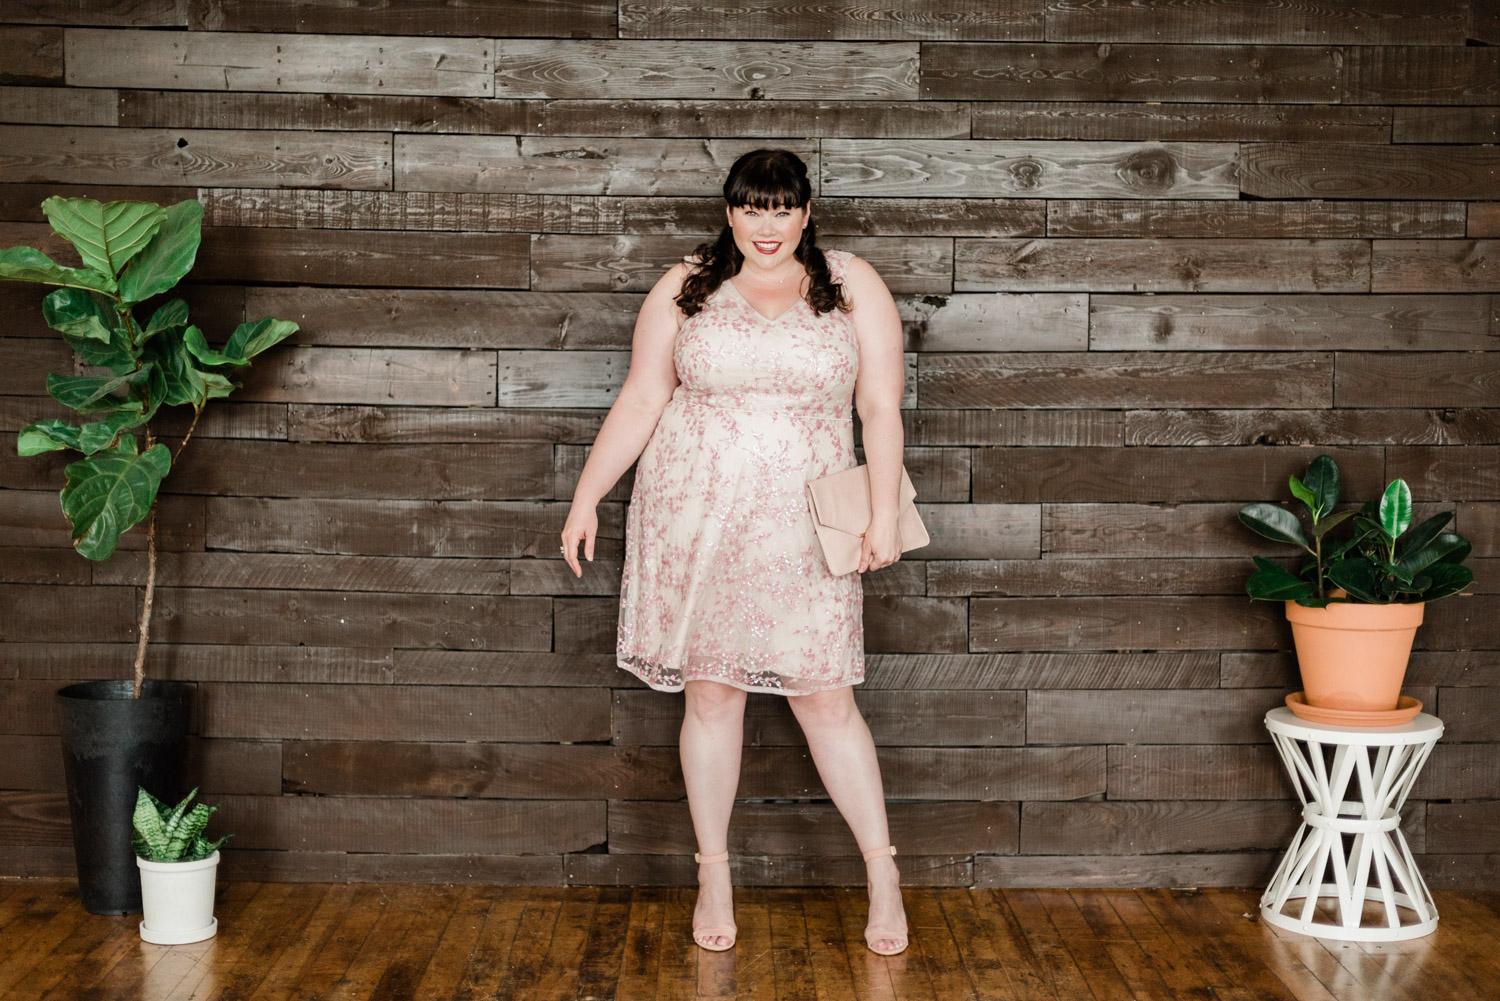 Plus Size Formal Gowns, Macy's, Style Plus Curves, Amber McCulloch, Plus Size Model, Plus Size Blogger, Adrianna Papell